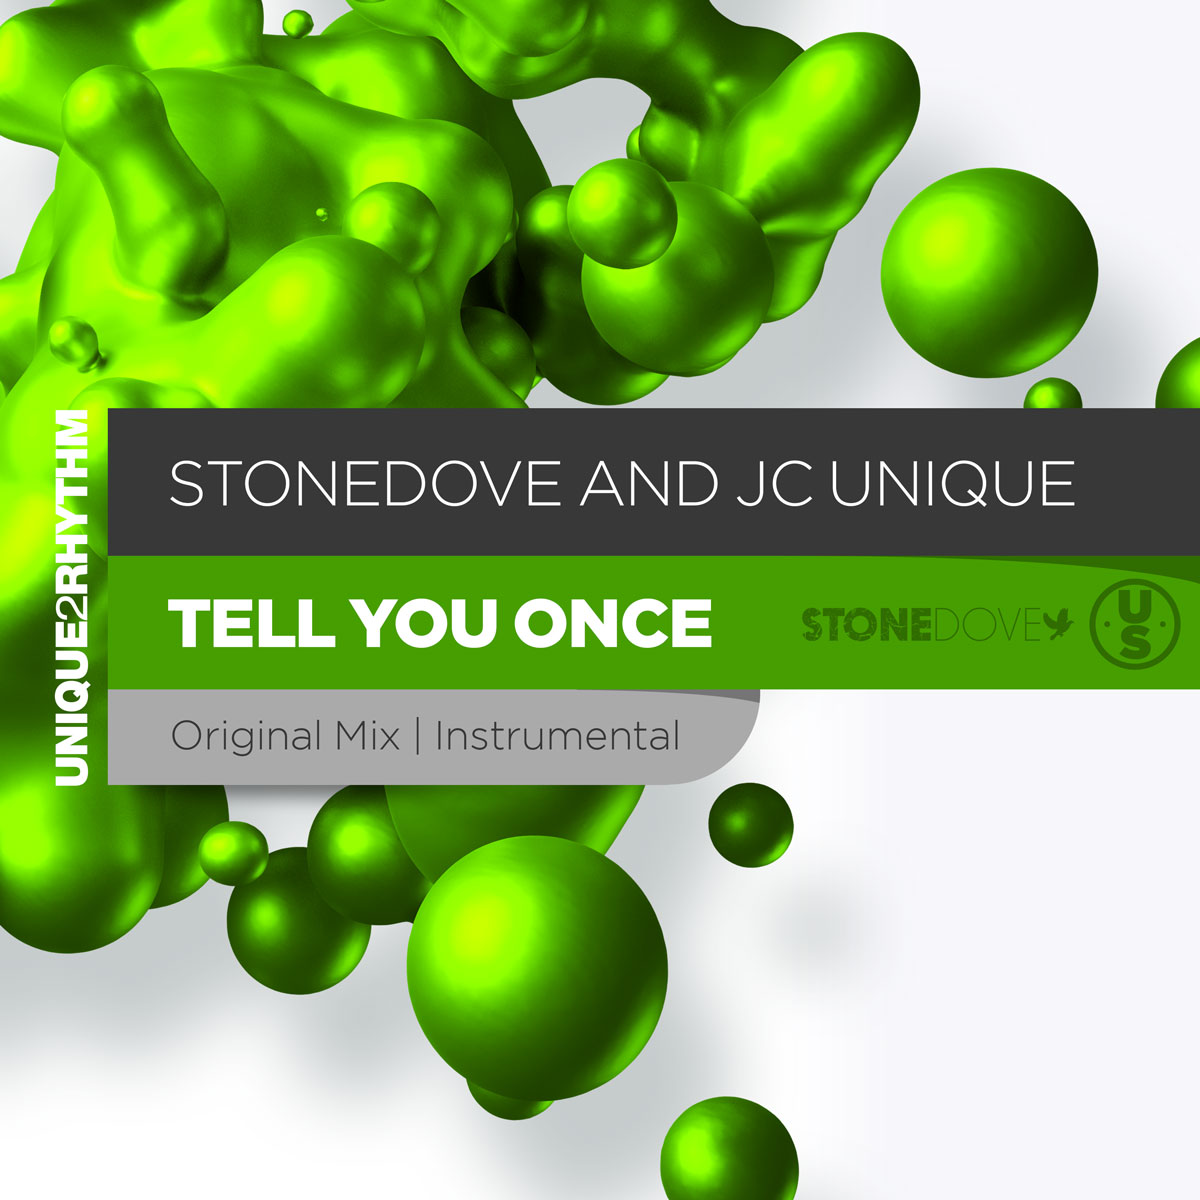 Stonedove and JC Unique - Tell you once